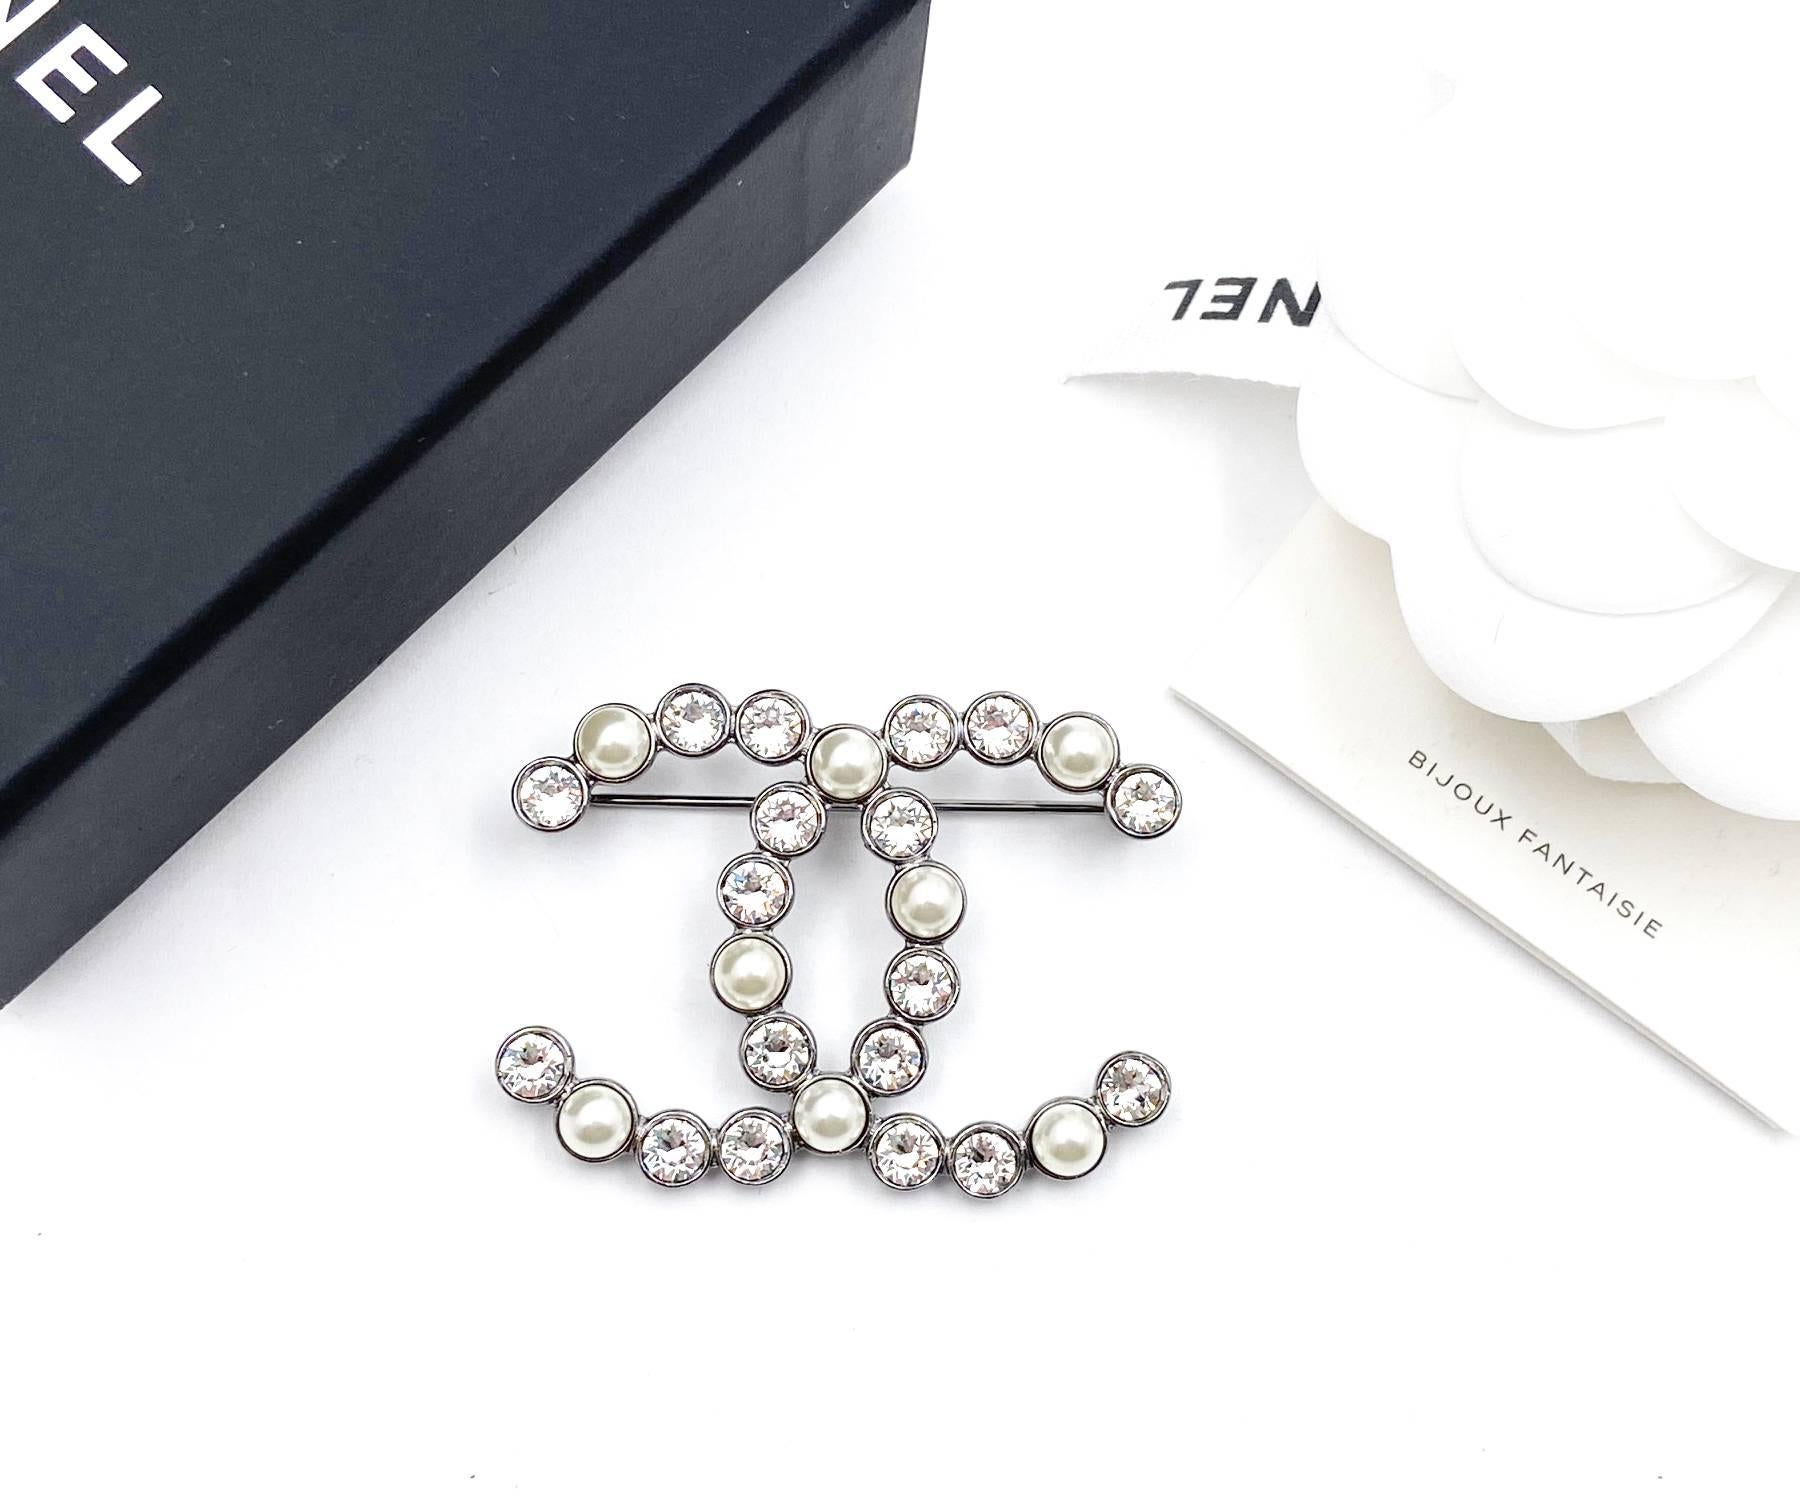 Chanel Brand New Grey CC Pearl Crystal Brooch

*Marked 20
*Made in Italy
*Comes with original box, pouch, booklet, camellia, ribbon and tag
*Brand New

-Approximately 1.9″ x 1.4″
-Great for every day wear
-Very pretty and shiny

18068-4280